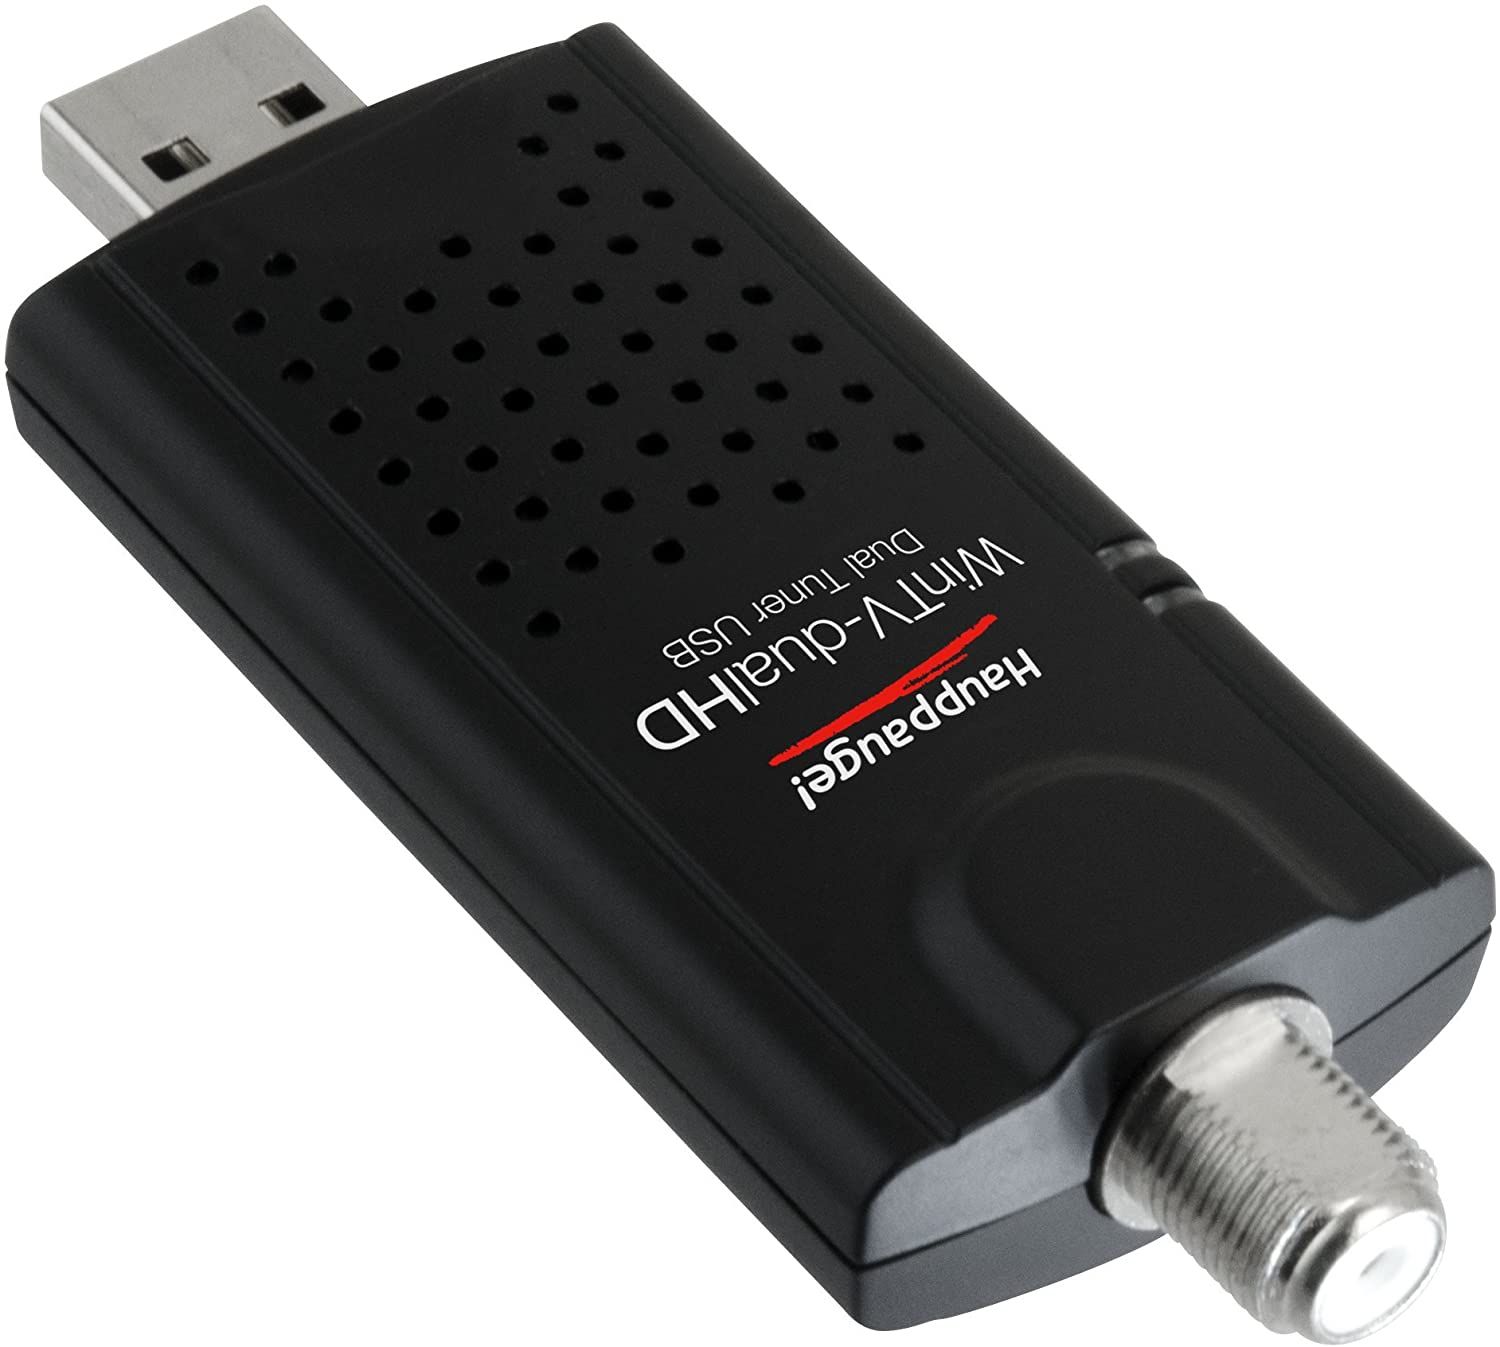 usb tv tuner for pc what is an iso image file